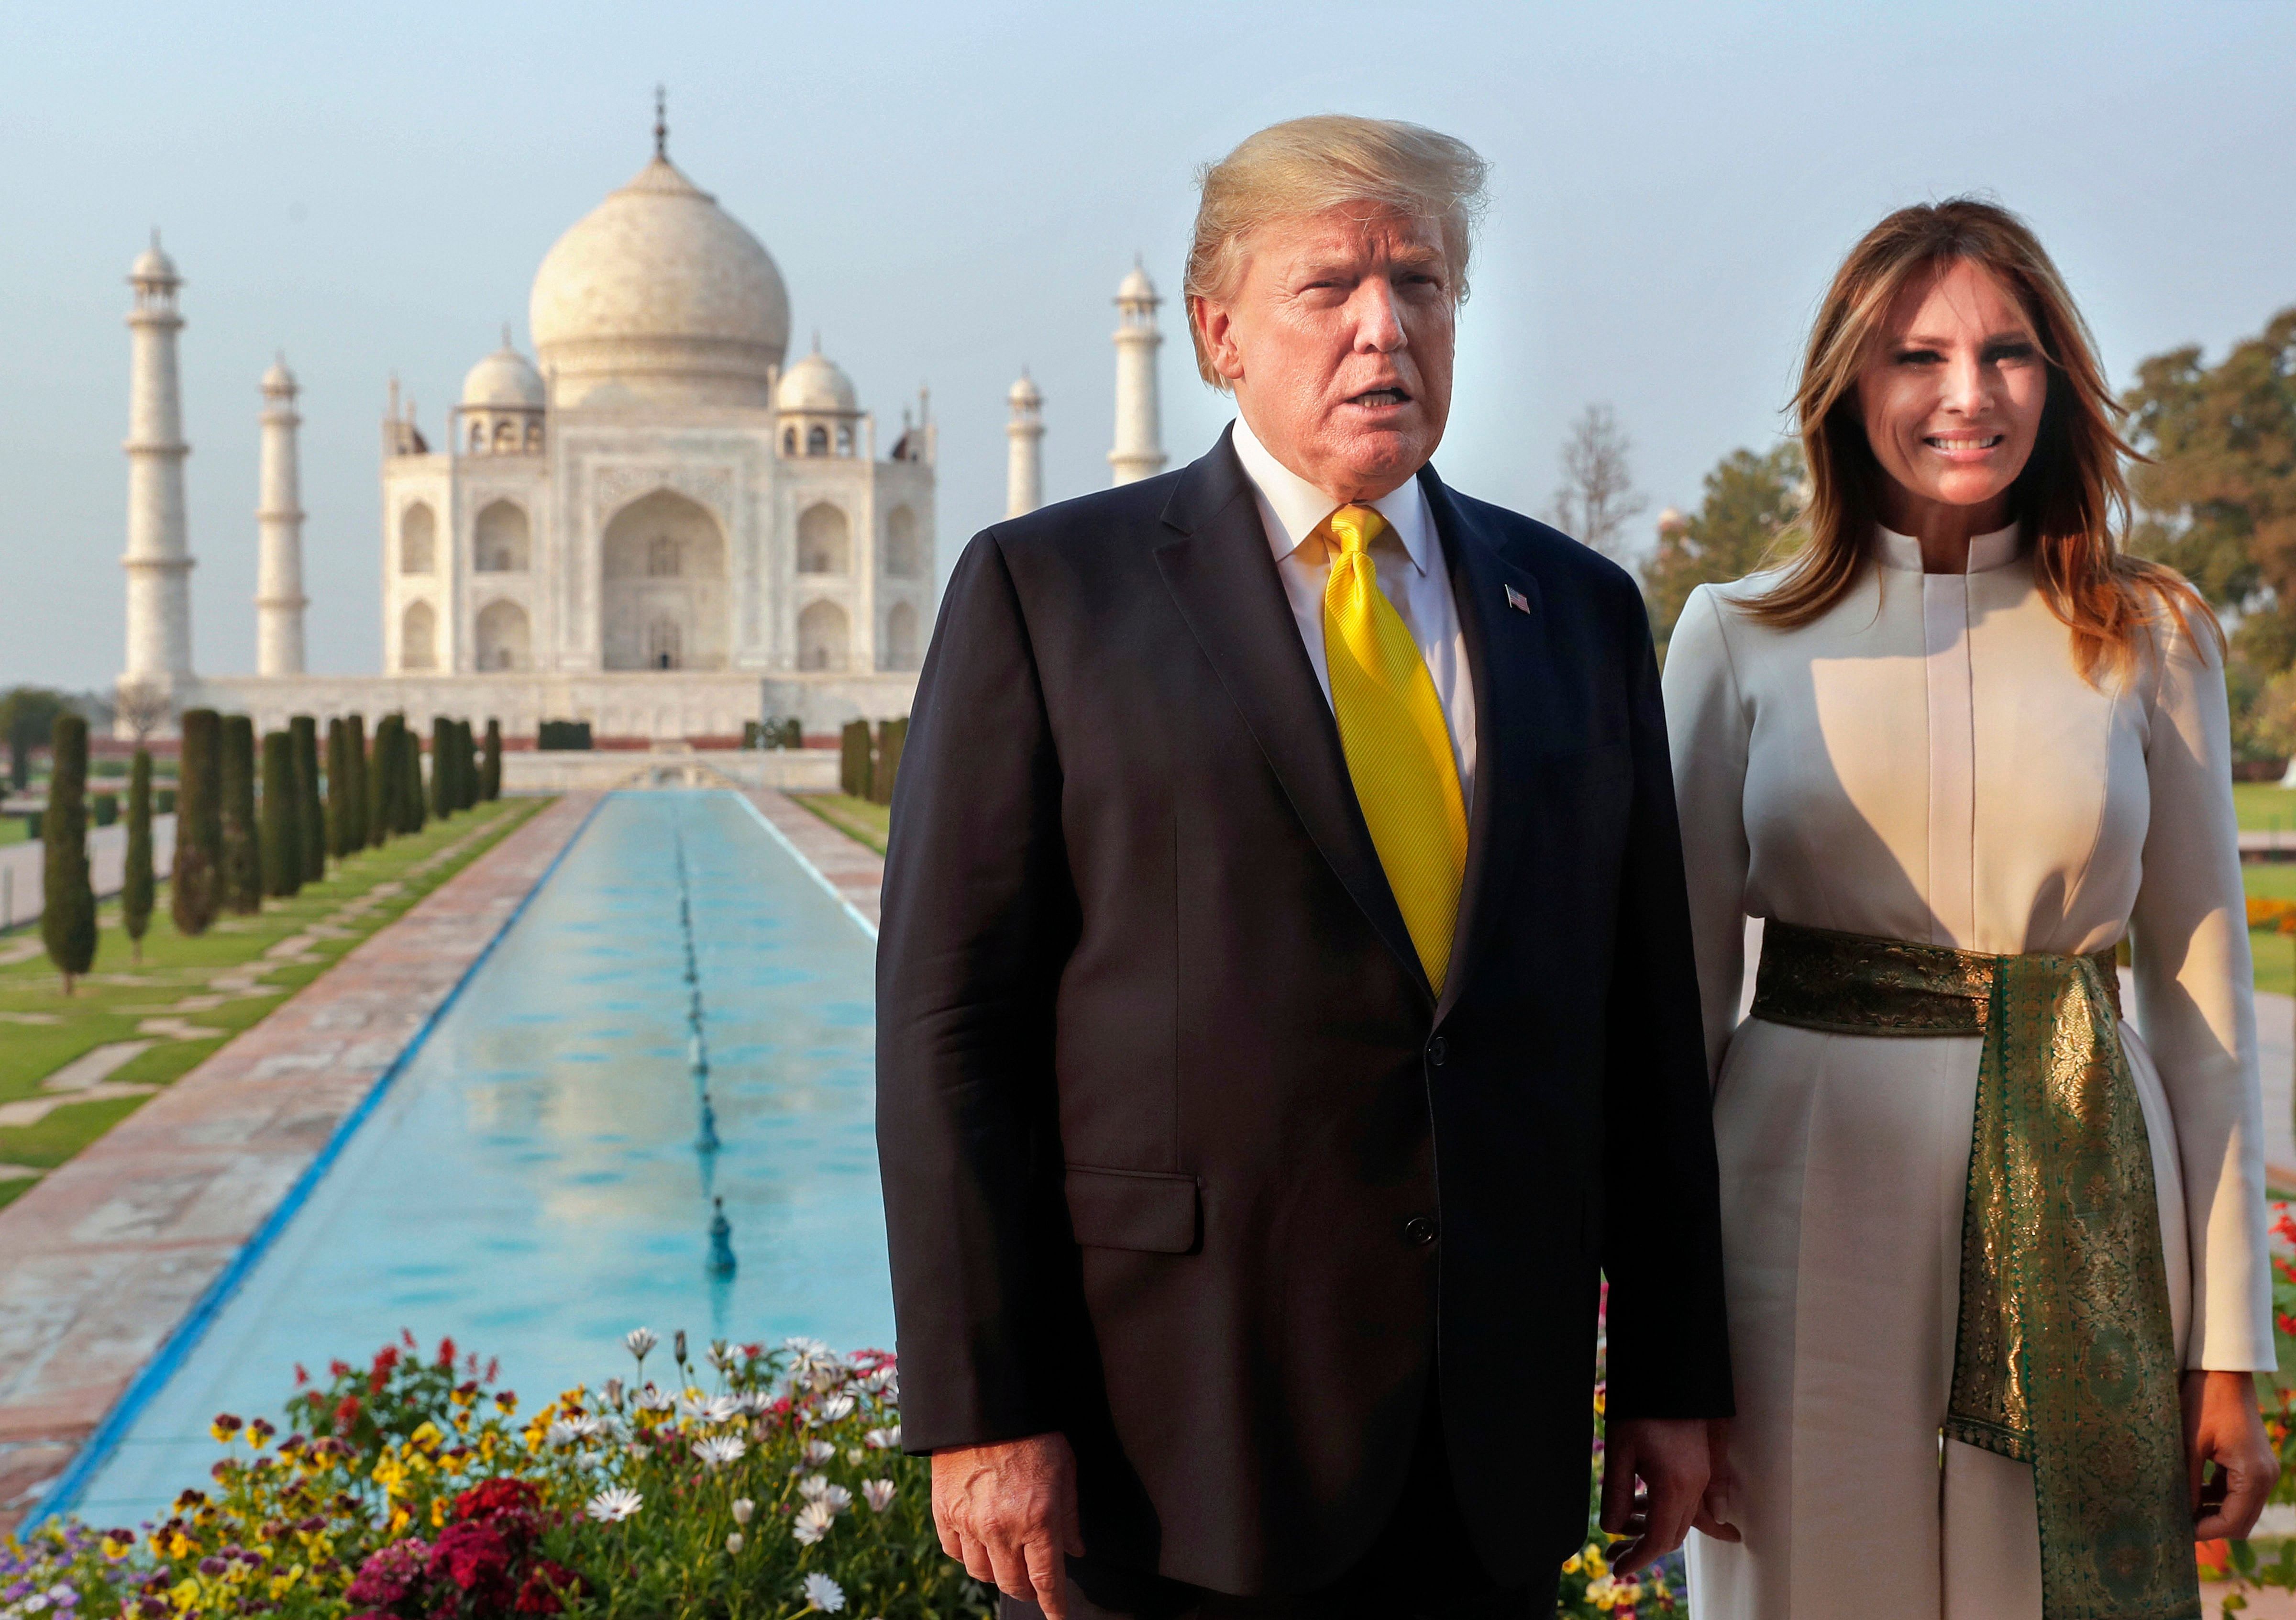 US President Donald Trump, and First Lady Melania Trump visit the Taj Mahal, the 17th century monument to love in Agra. (Credit: PTI Photo)